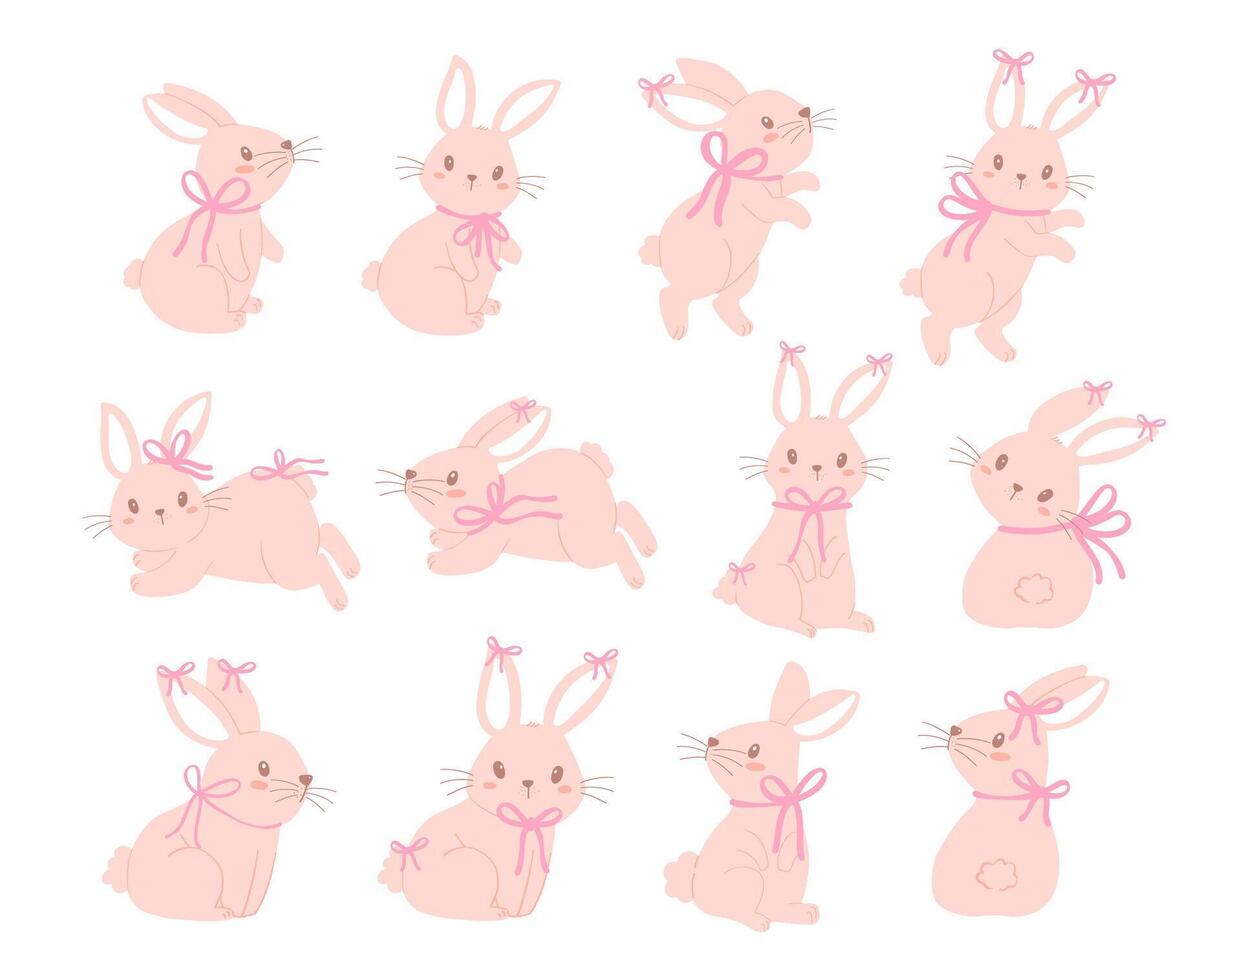 Coquette Pink Bunny Rabbit Collection Flat Design Graphics vector